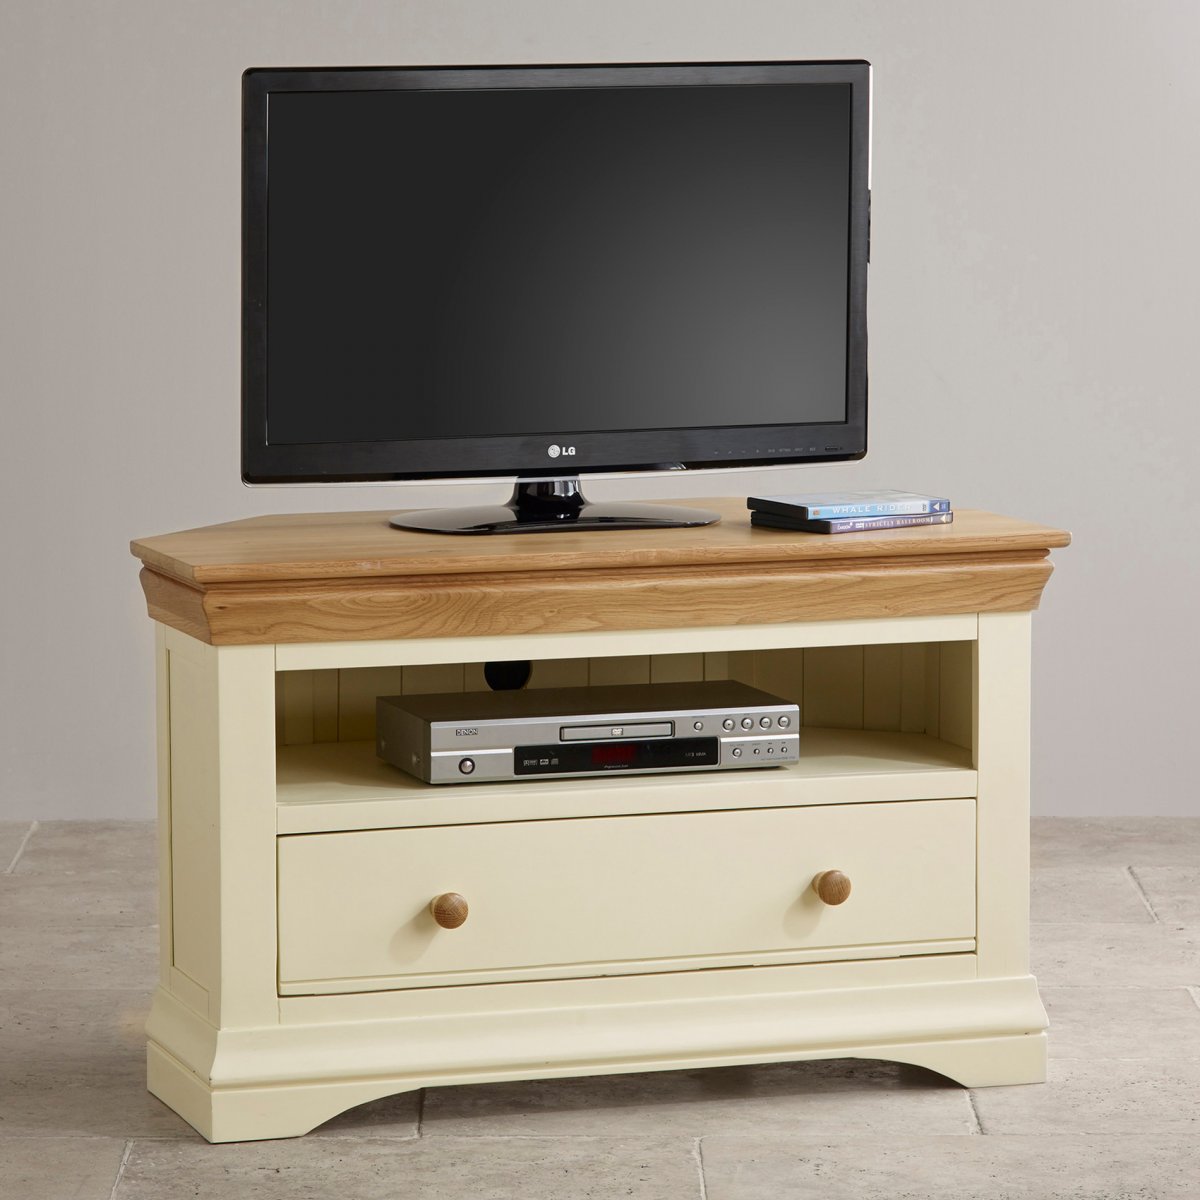 Country Cottage Natural Oak  Corner TV  Cabinet  Cream Painted